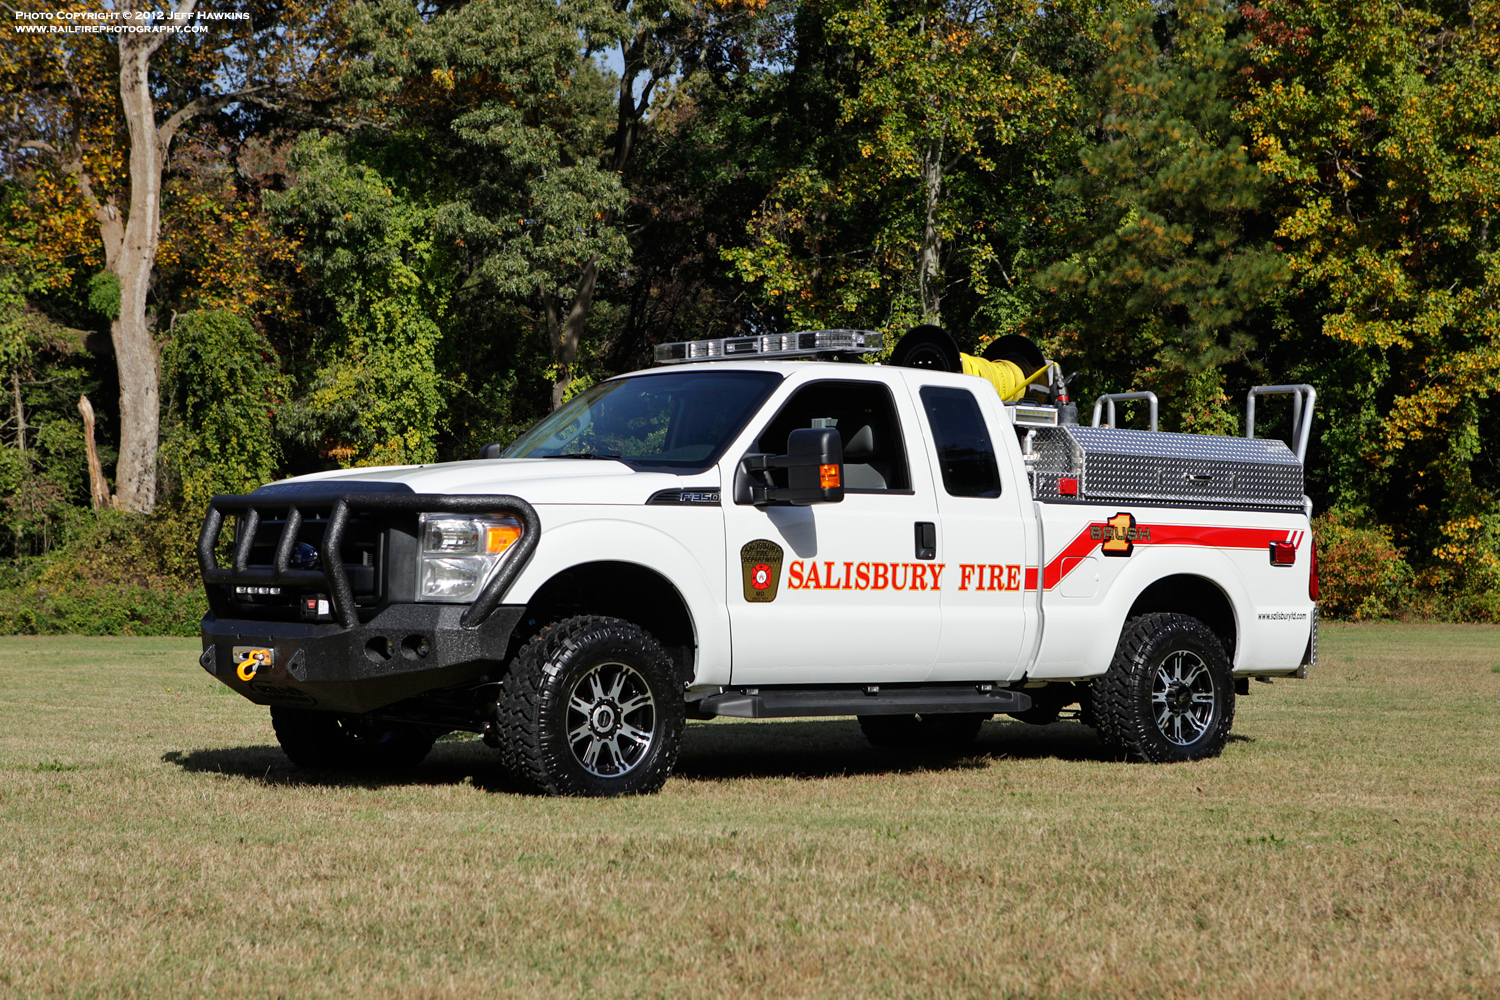 Featured image for “Salisbury Fire Department / DPC Brush Truck”